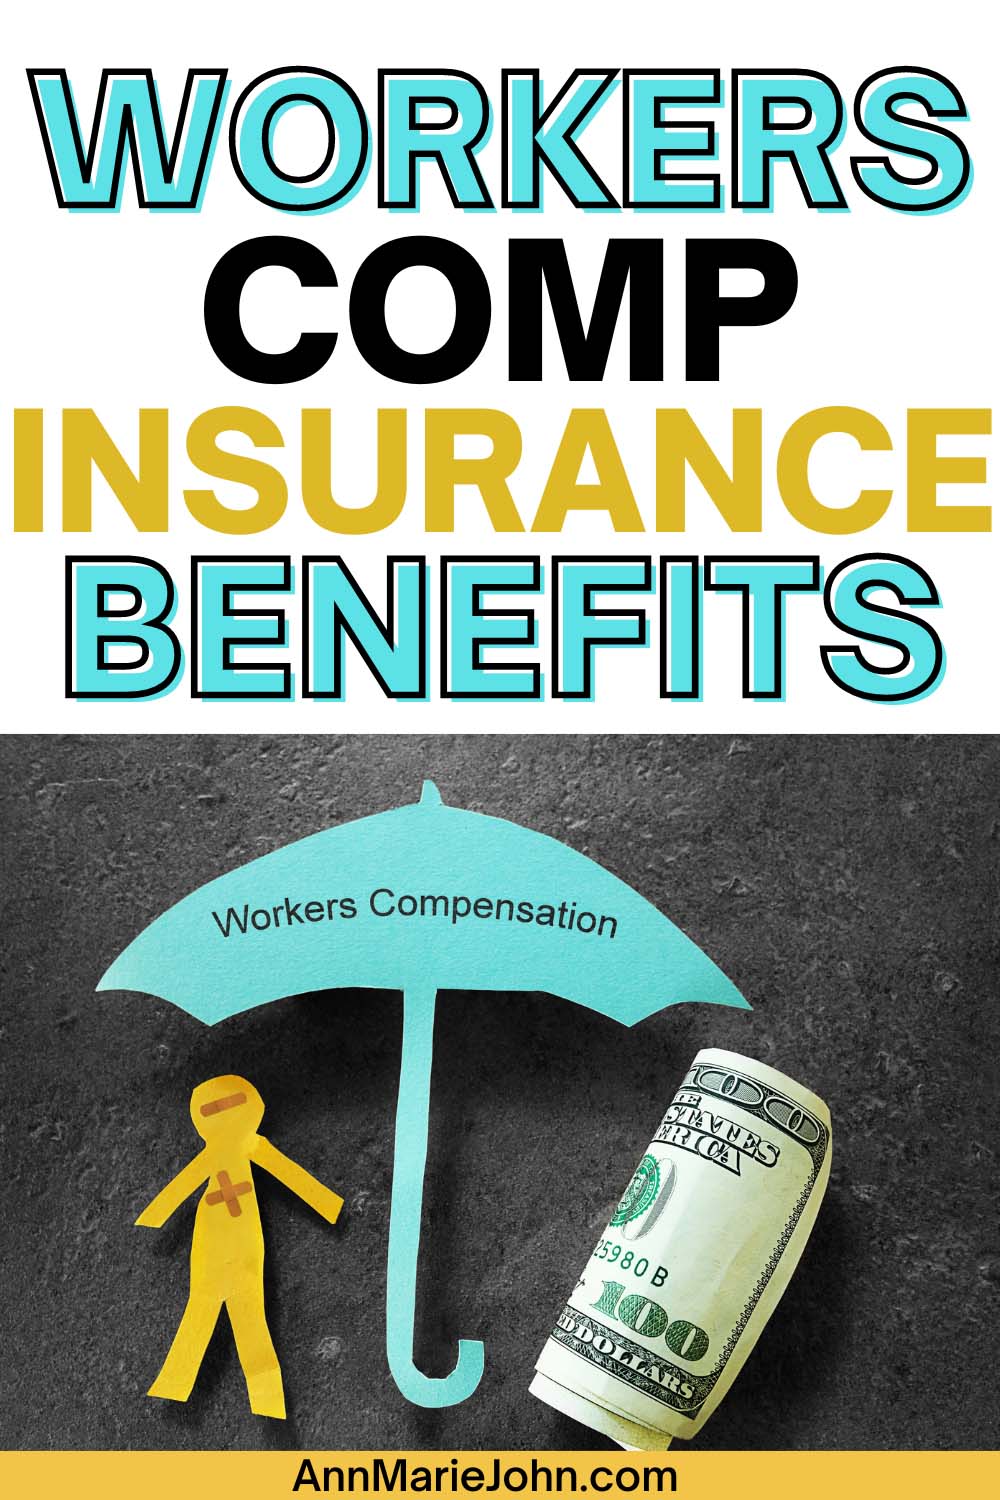 Workers Compensation Insurance Benefits